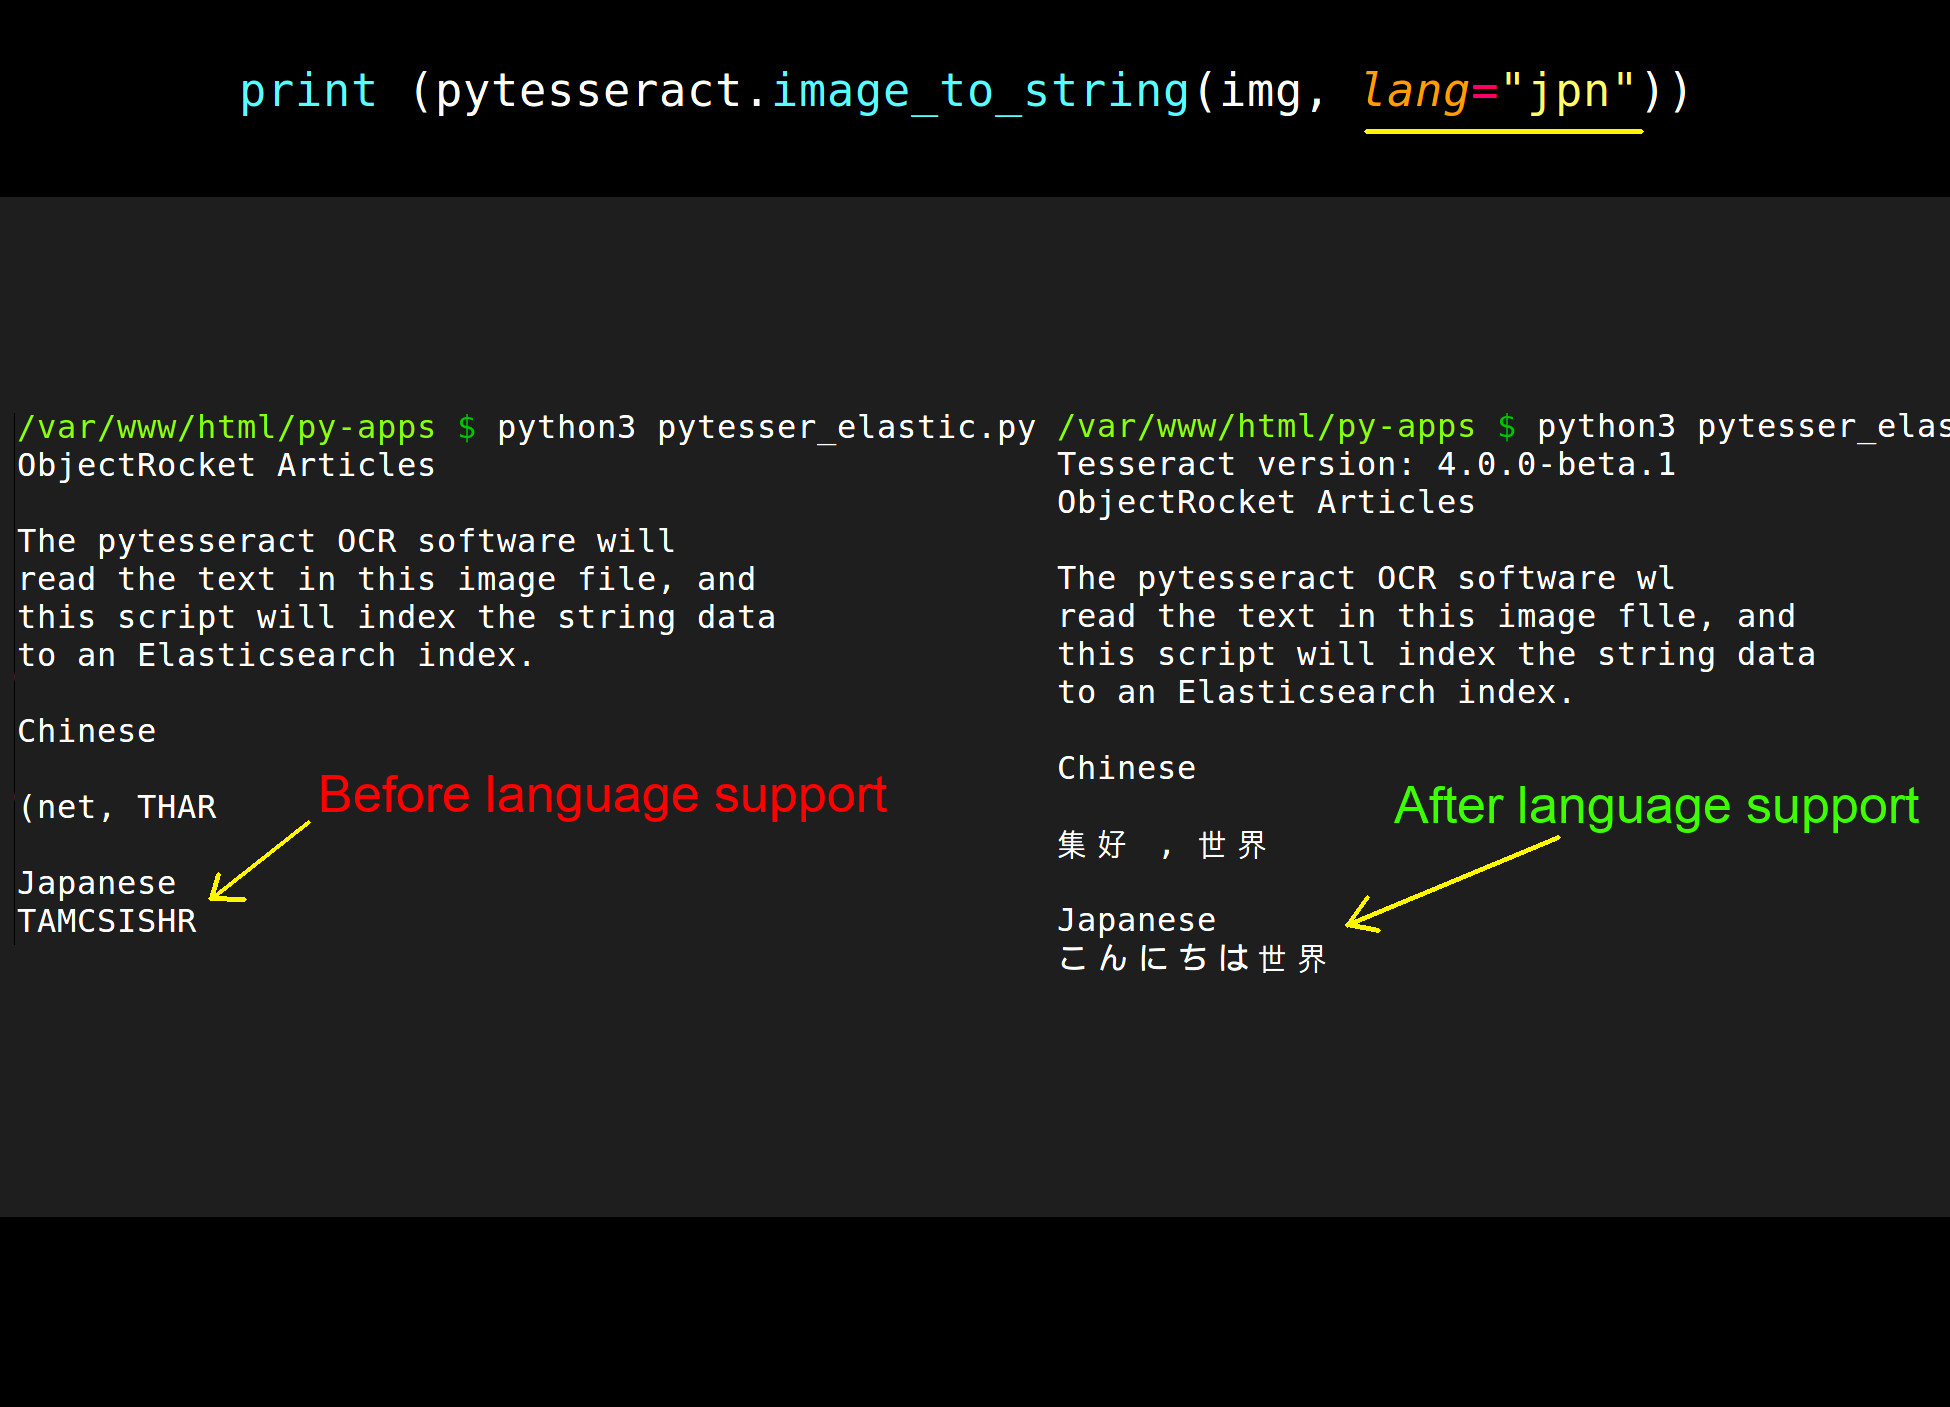 Screenshot of PyTesseract Python OCR data with and without Japanese and Chinese language support